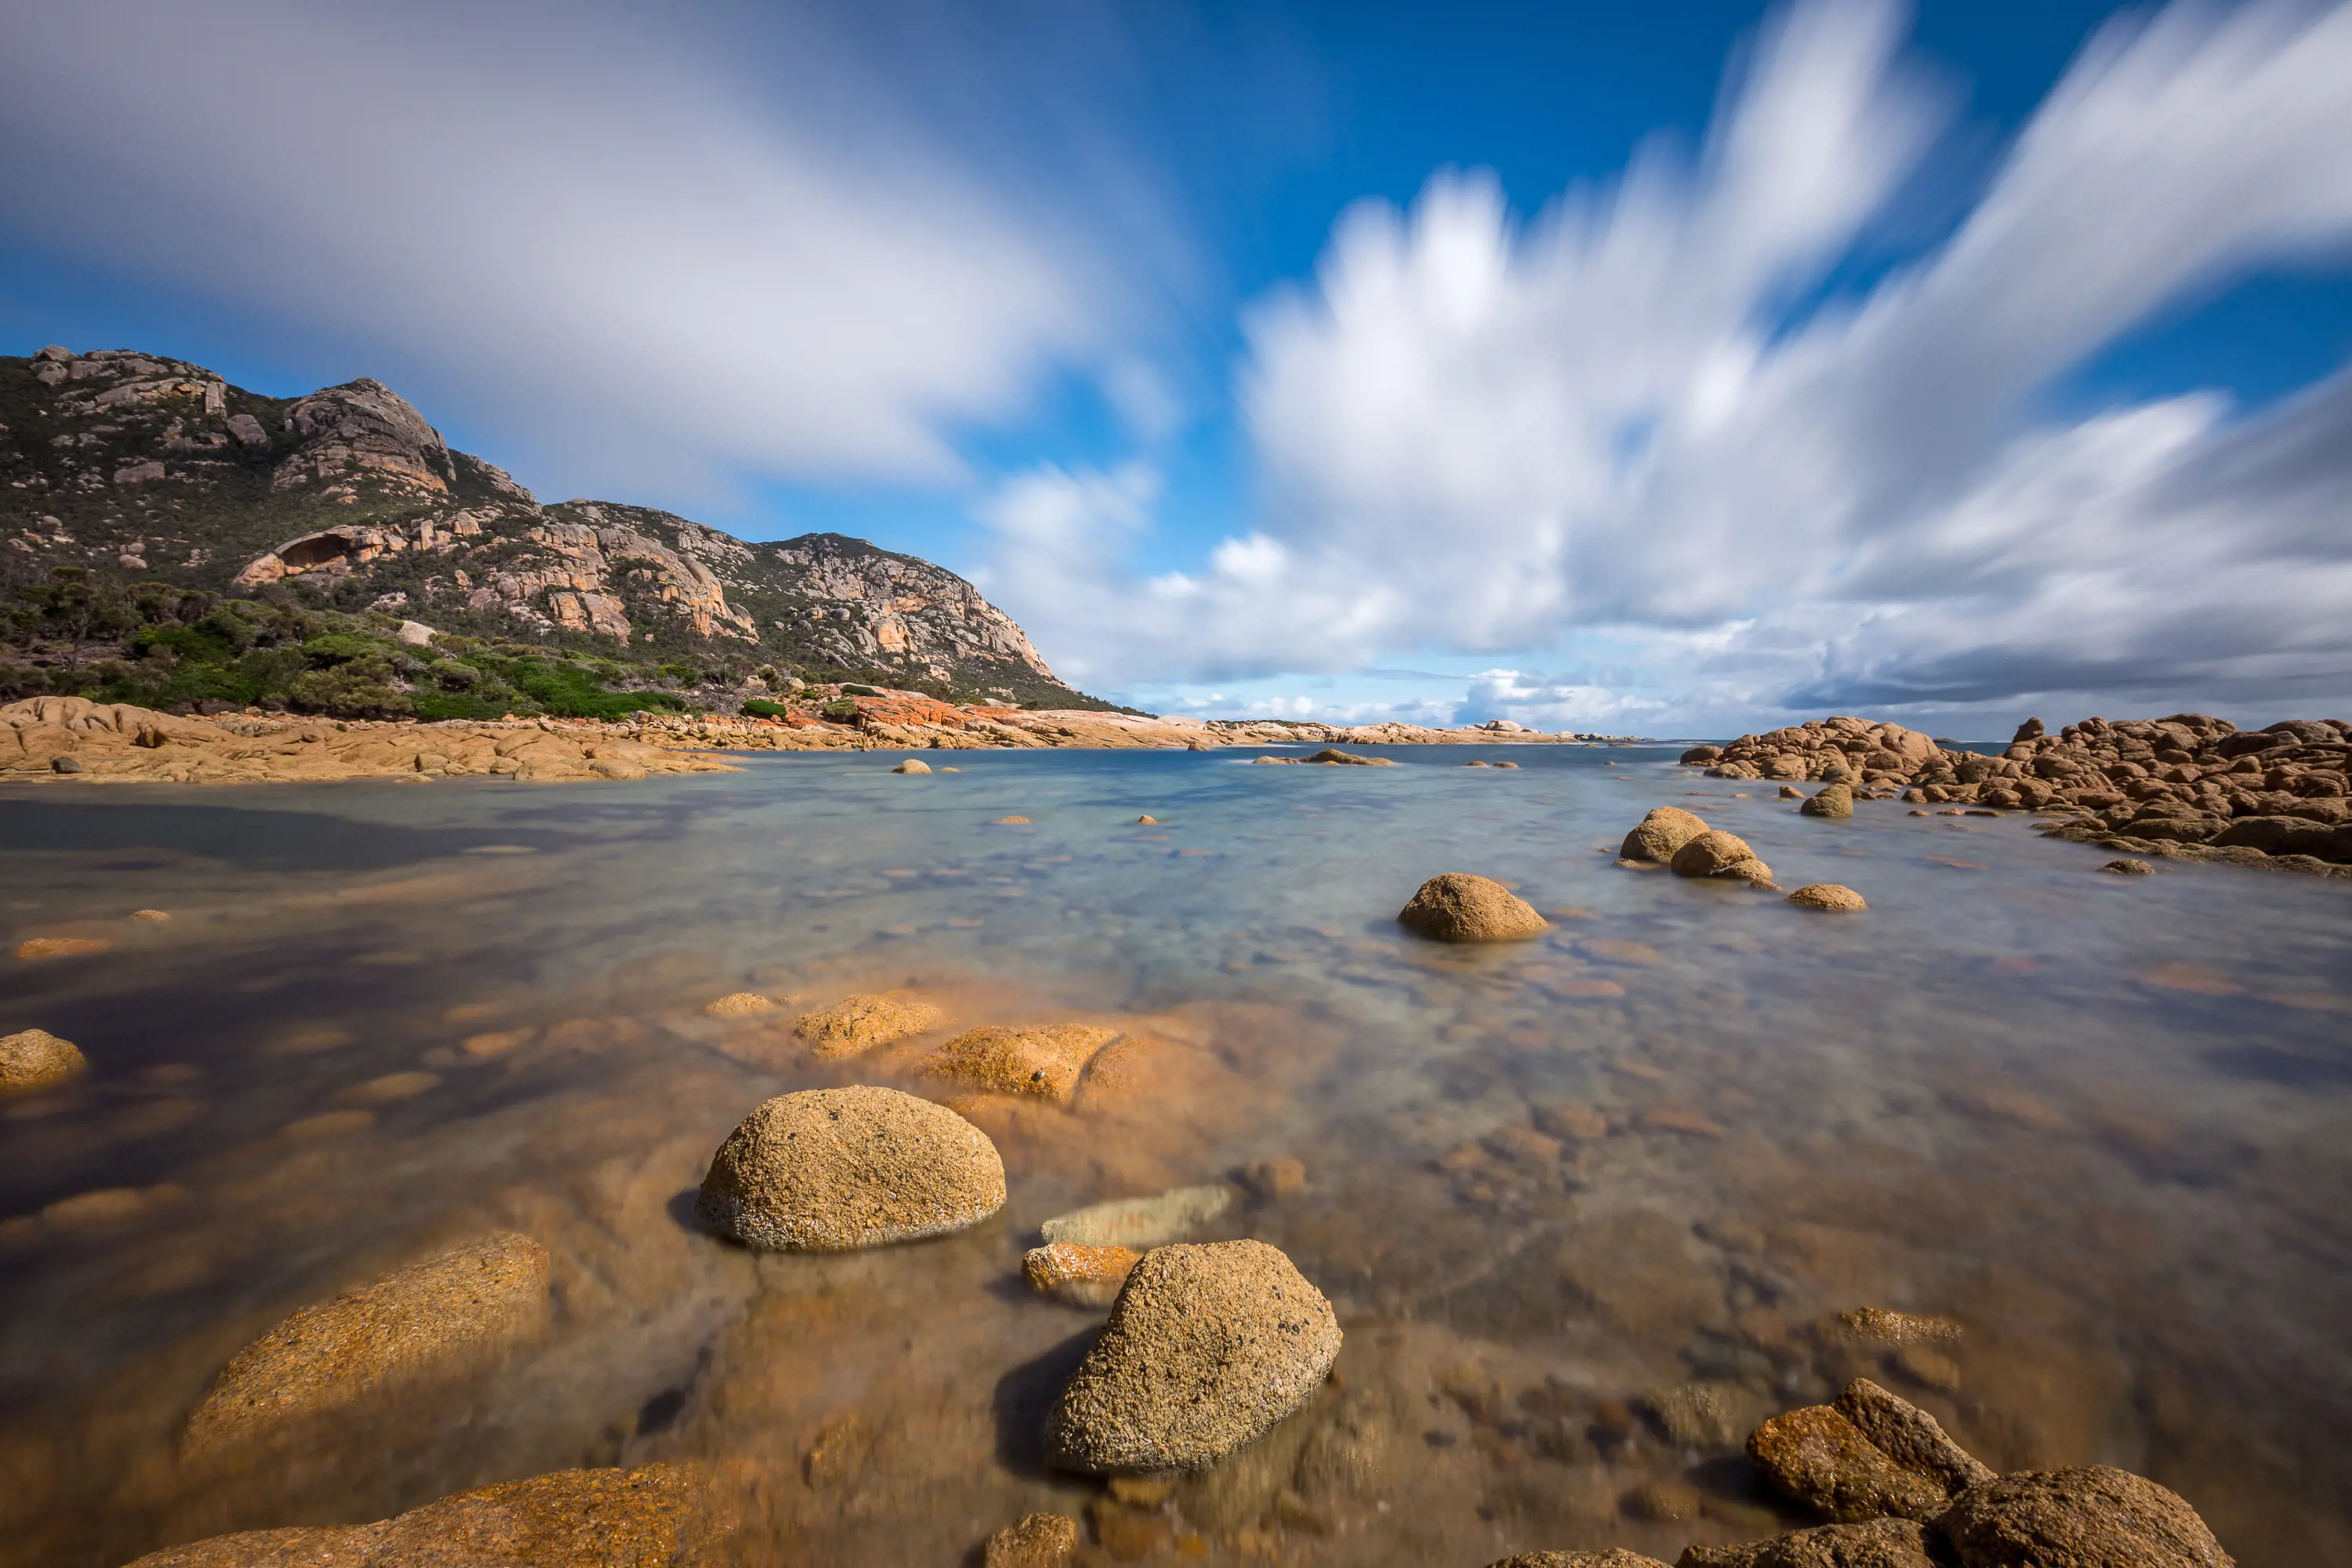 Incredible wide angle image of The Dock, Flinders Island on a clear, sunny day. Where the mountains meet the coastline. 